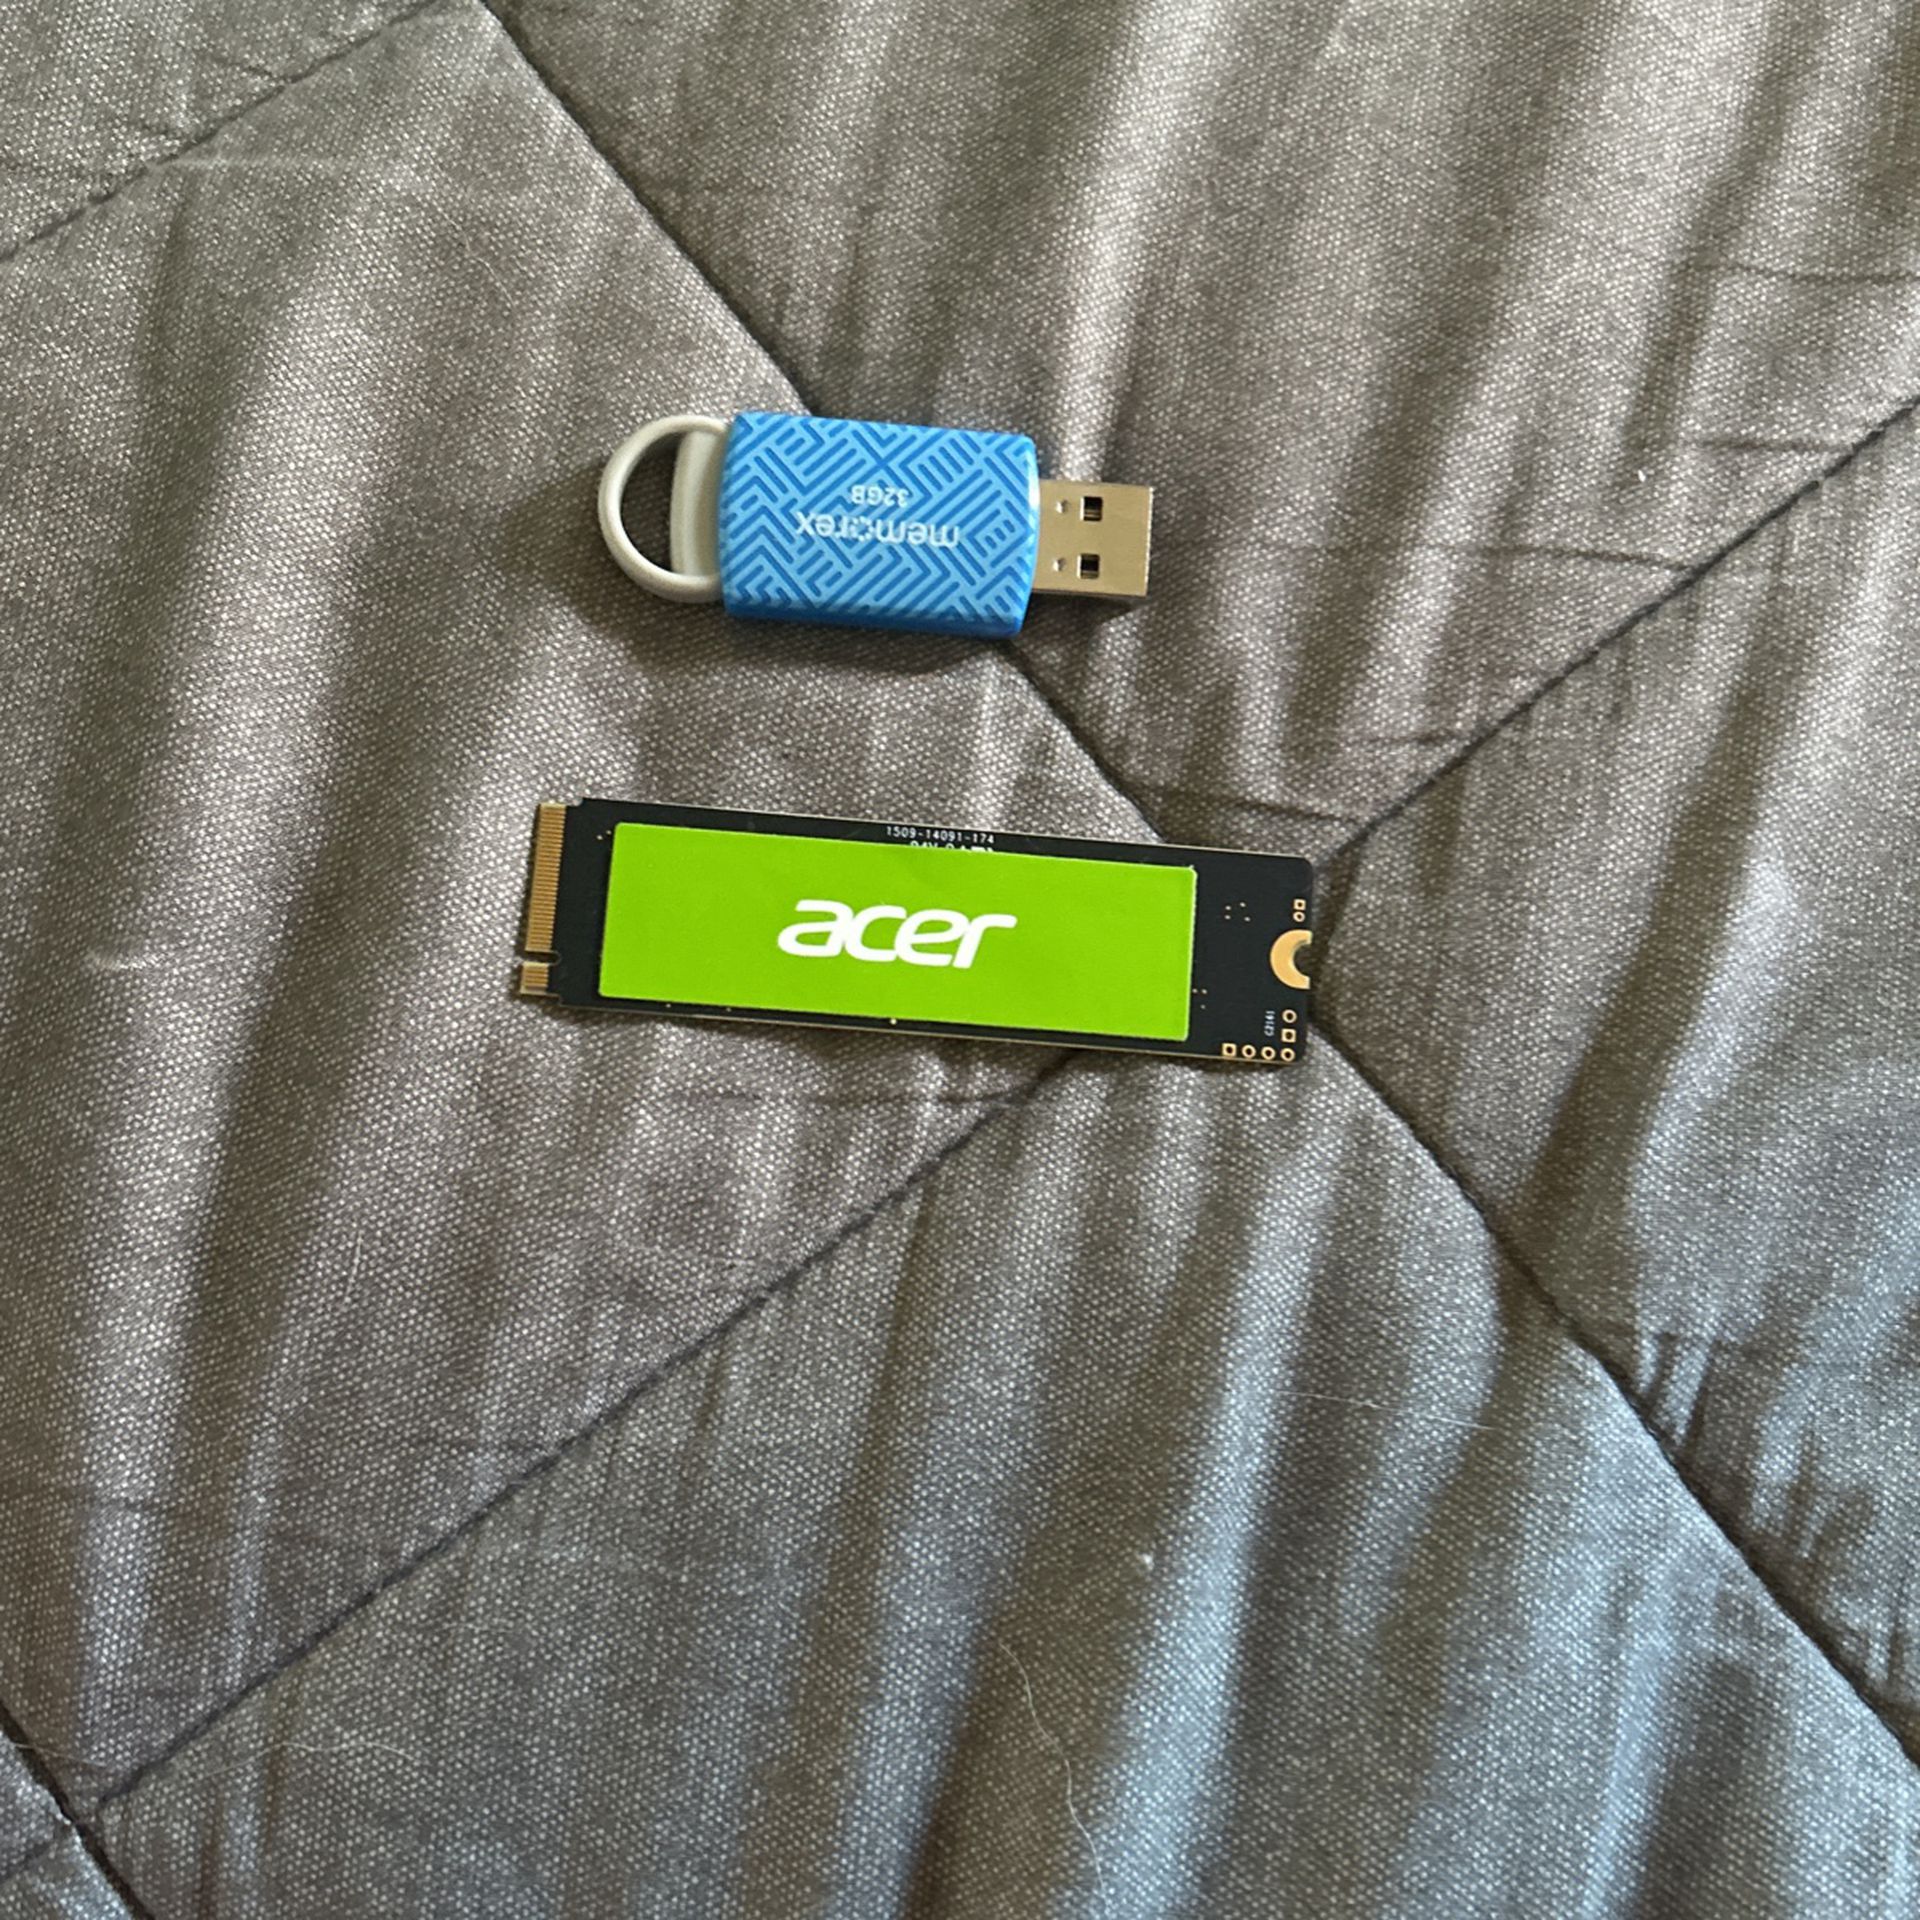 512gb Acer And 32gb Flash Drive